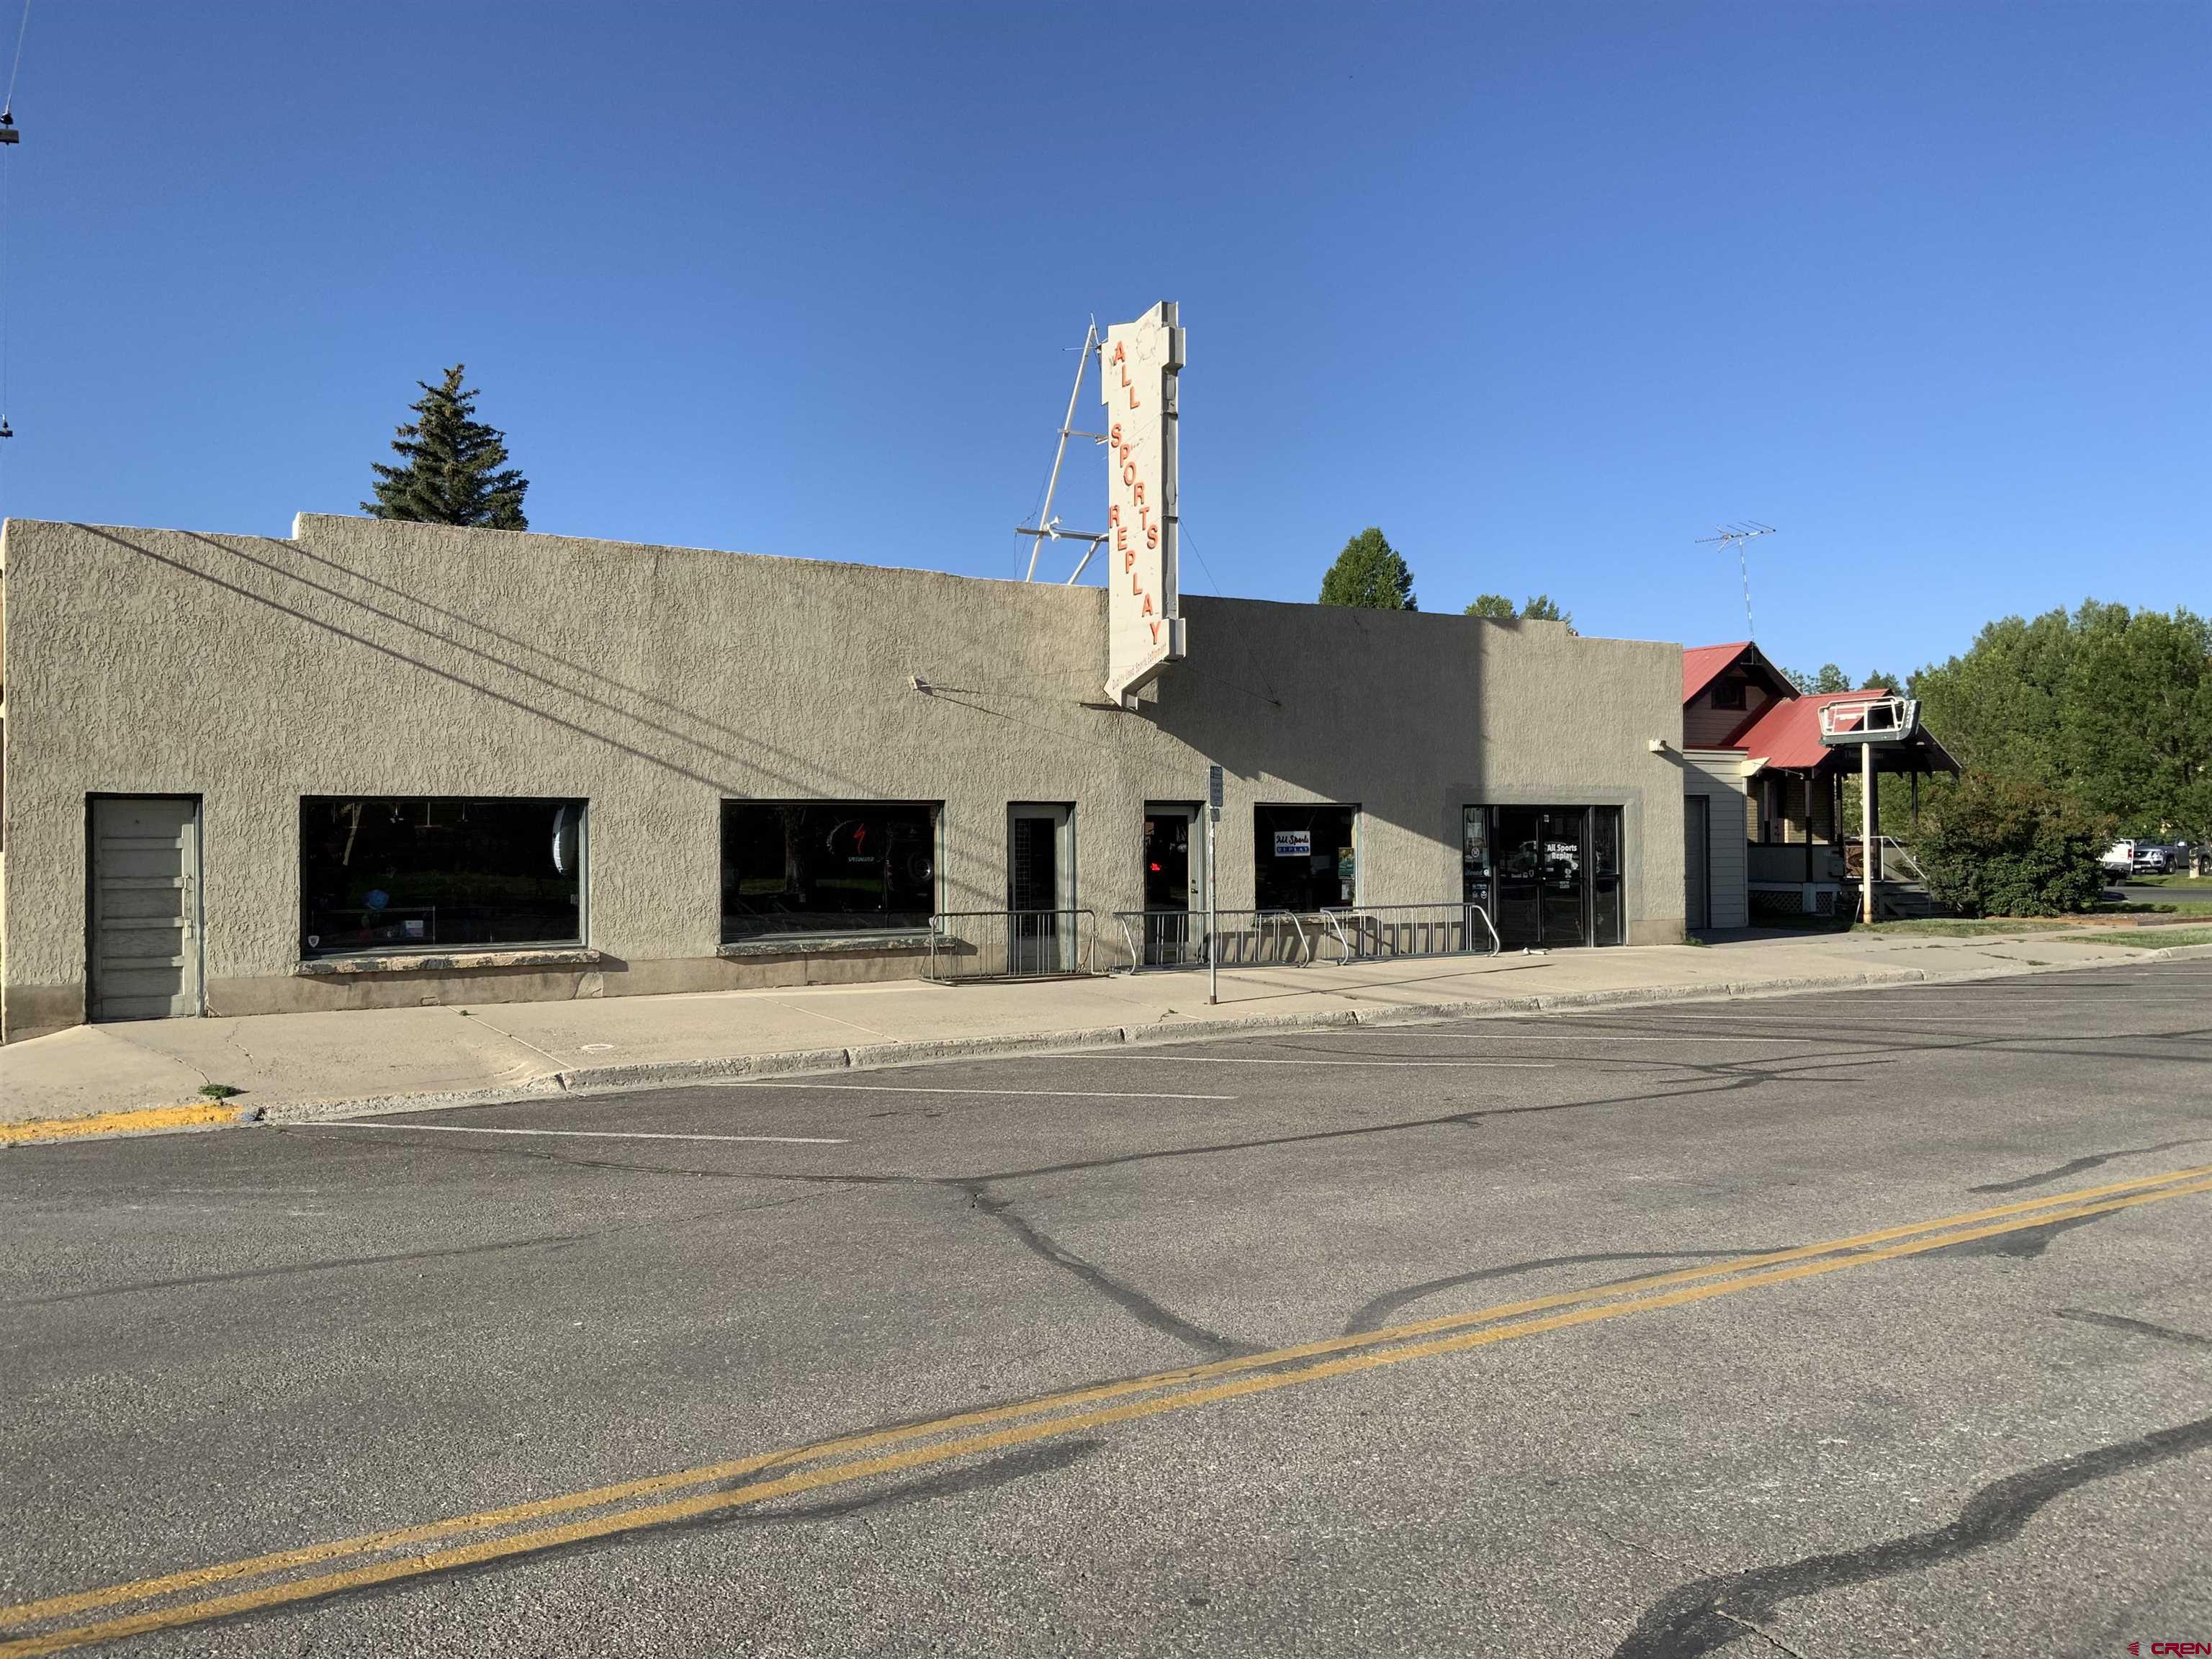 Great opportunity to own a commercial building in downtown Gunnison along with a fun and profitable sporting goods business.  All Sports Replay has been in business since 1996 and offers new items, consignment items, bike repair, full service ski maintenance (base grind, waxing and sharpening) and ice skate sharpening.  Building is 6,468 square feet with two restrooms, one dressing room, an office and an attached garage bay for storage.  There is a 7' x 8' garage door off the alley for deliveries into one of the extra storage rooms.  The ski shop side also has two restrooms.  Outside fenced in storage at the back of the building as well.